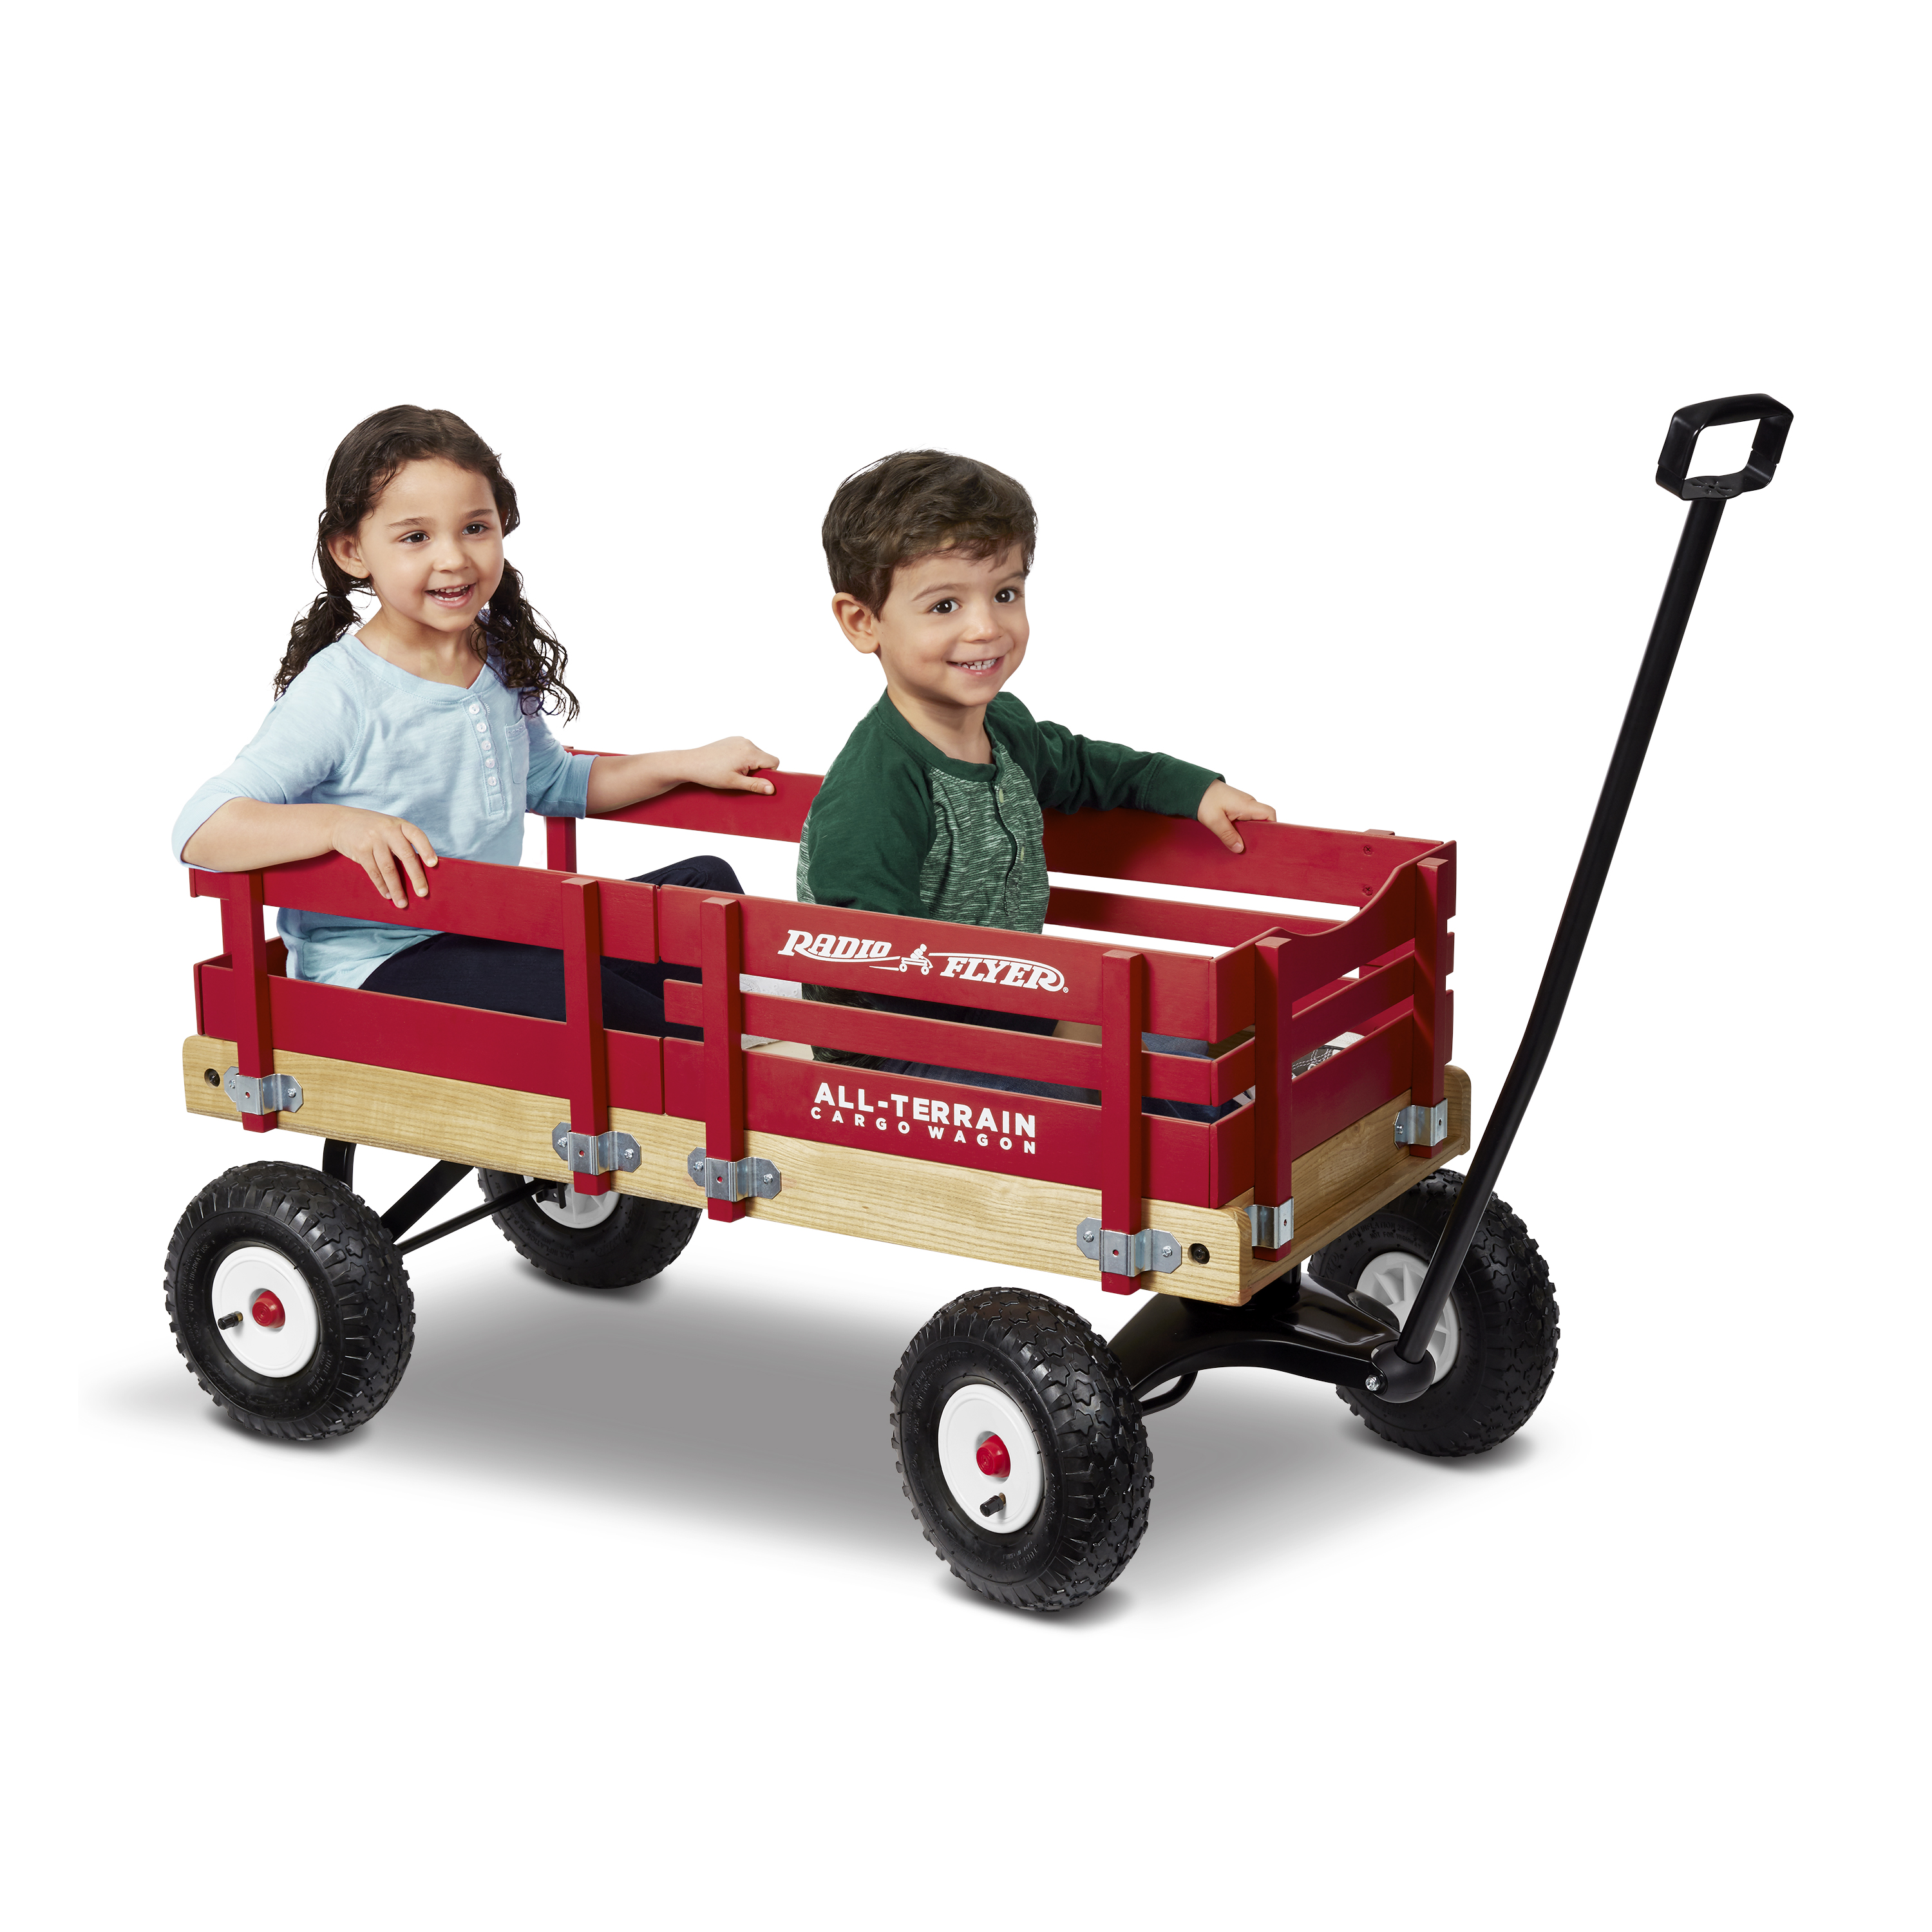 Radio Flyer, All-Terrain Wood Cargo Wagon, Air Tires, Red - image 2 of 8